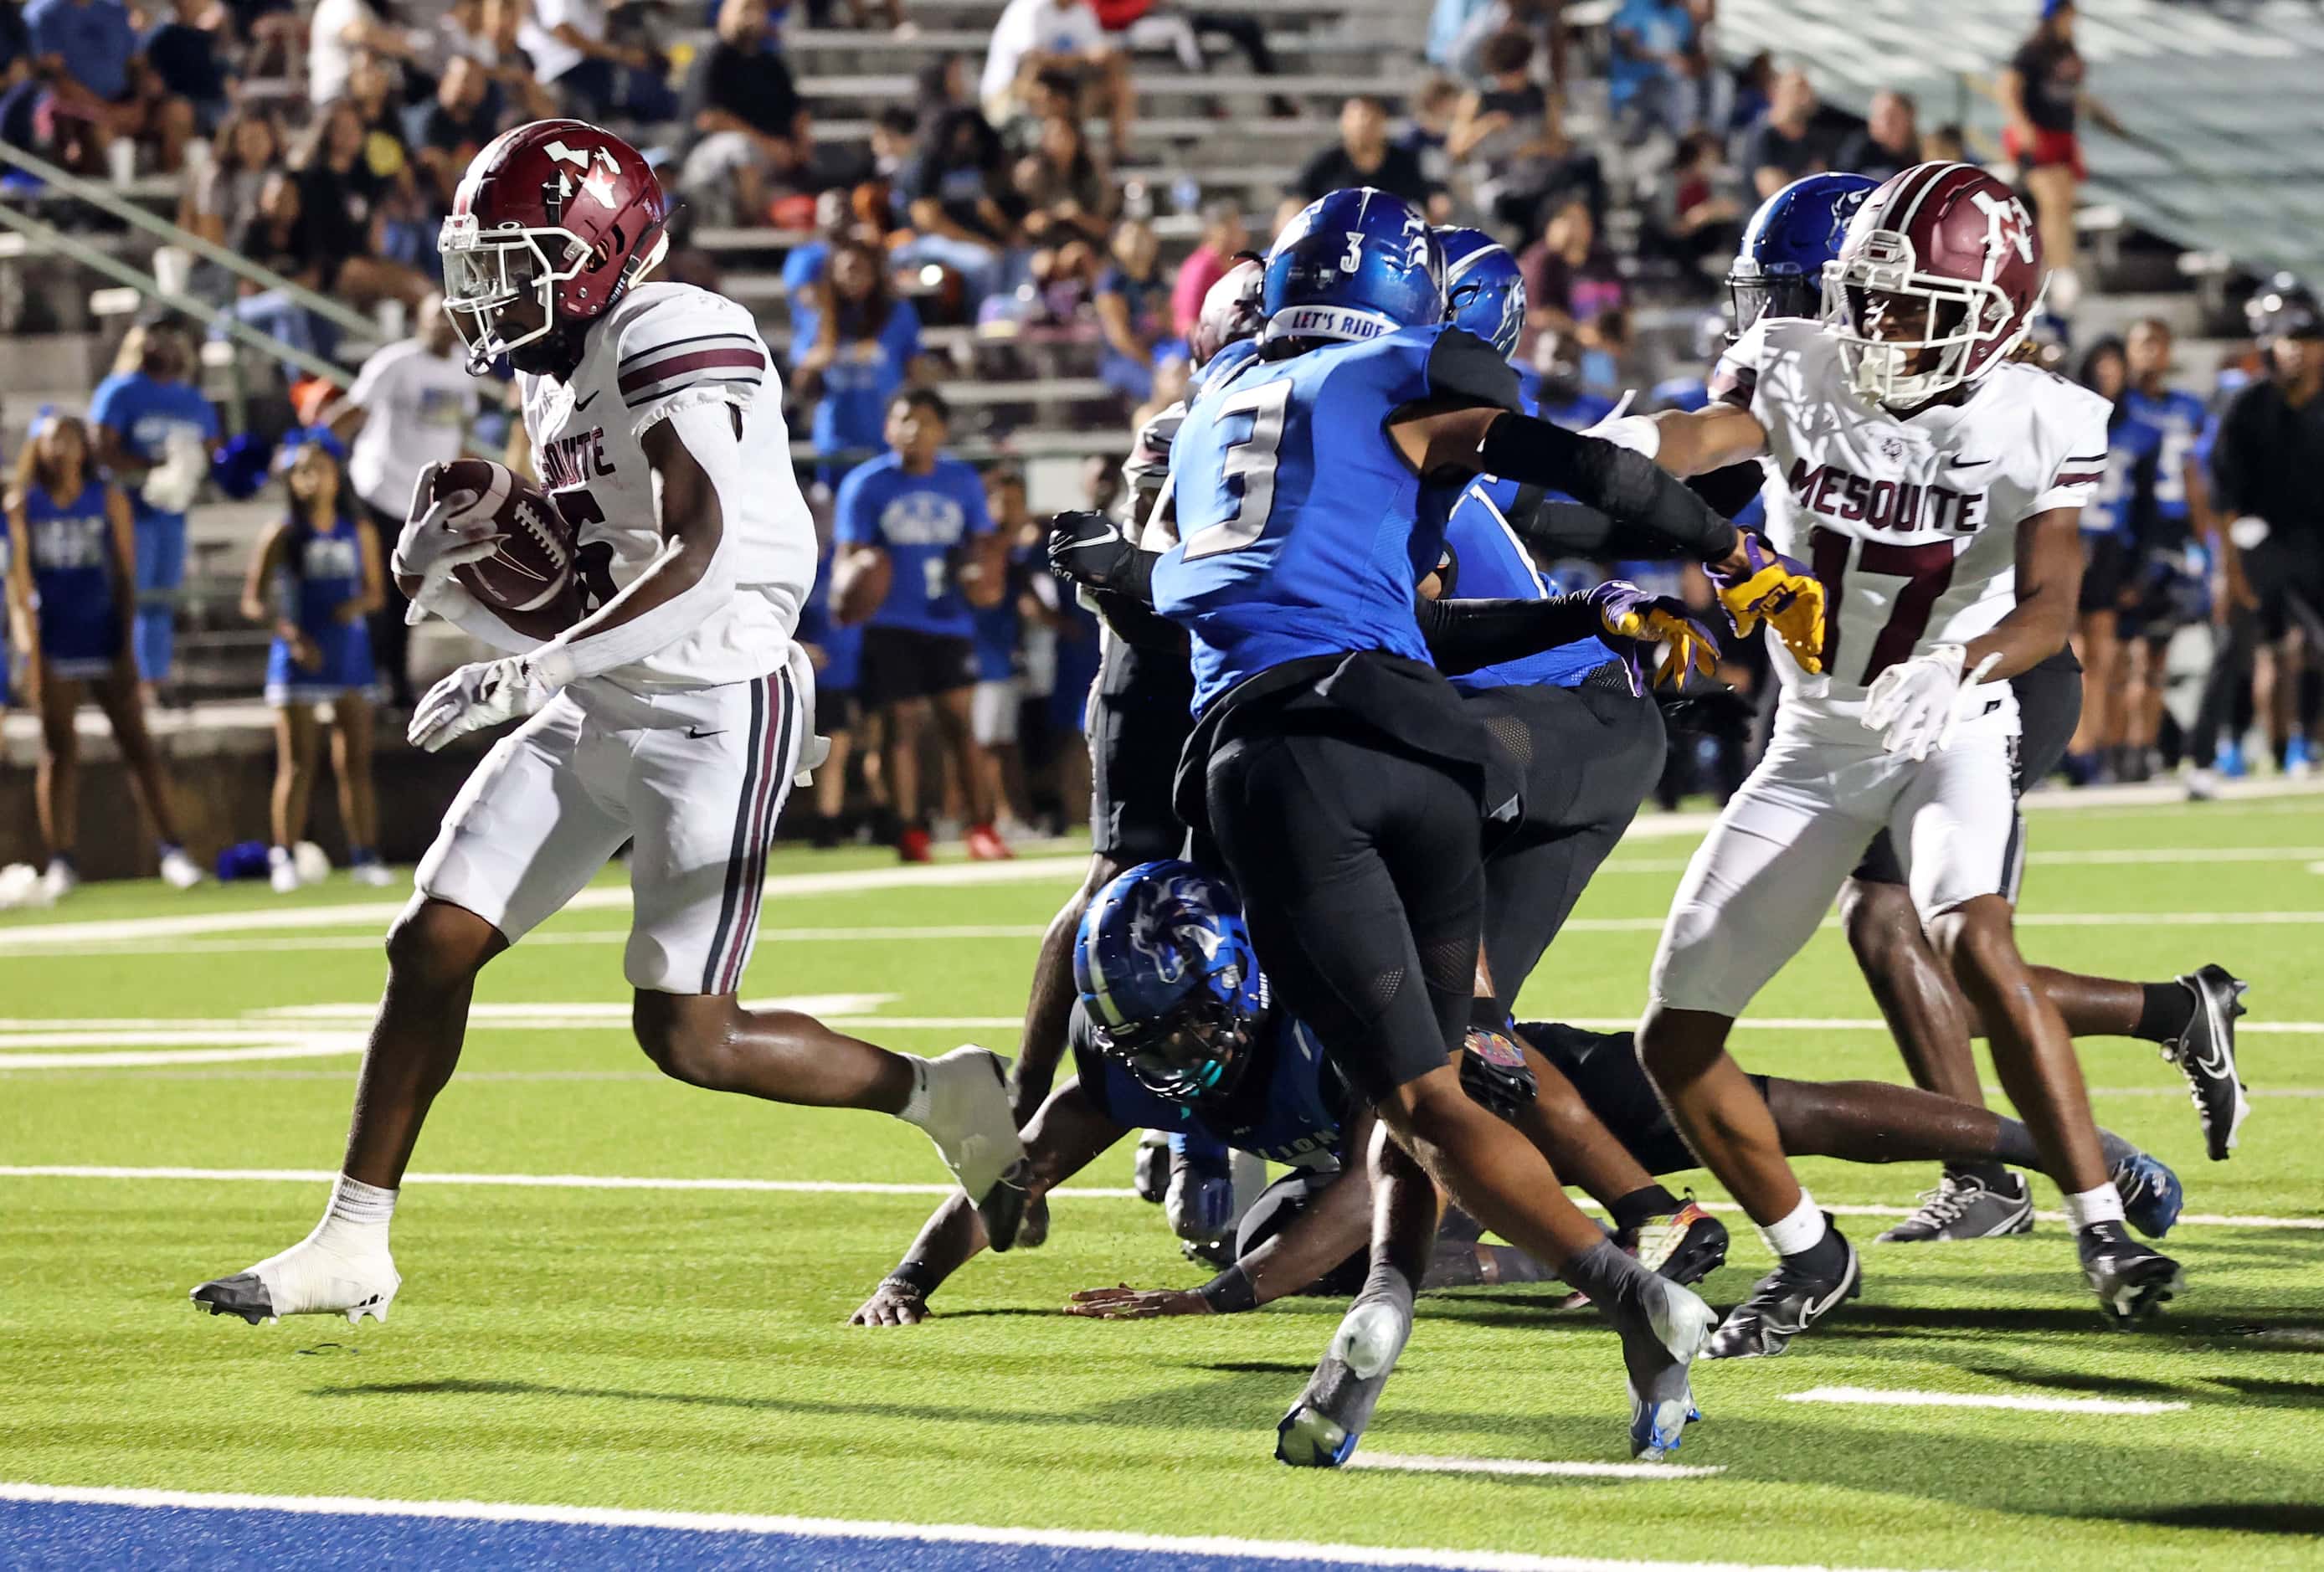 Mesquite RB Armand Cleaver (6) cuts through the North Mesquite defense in route to a...